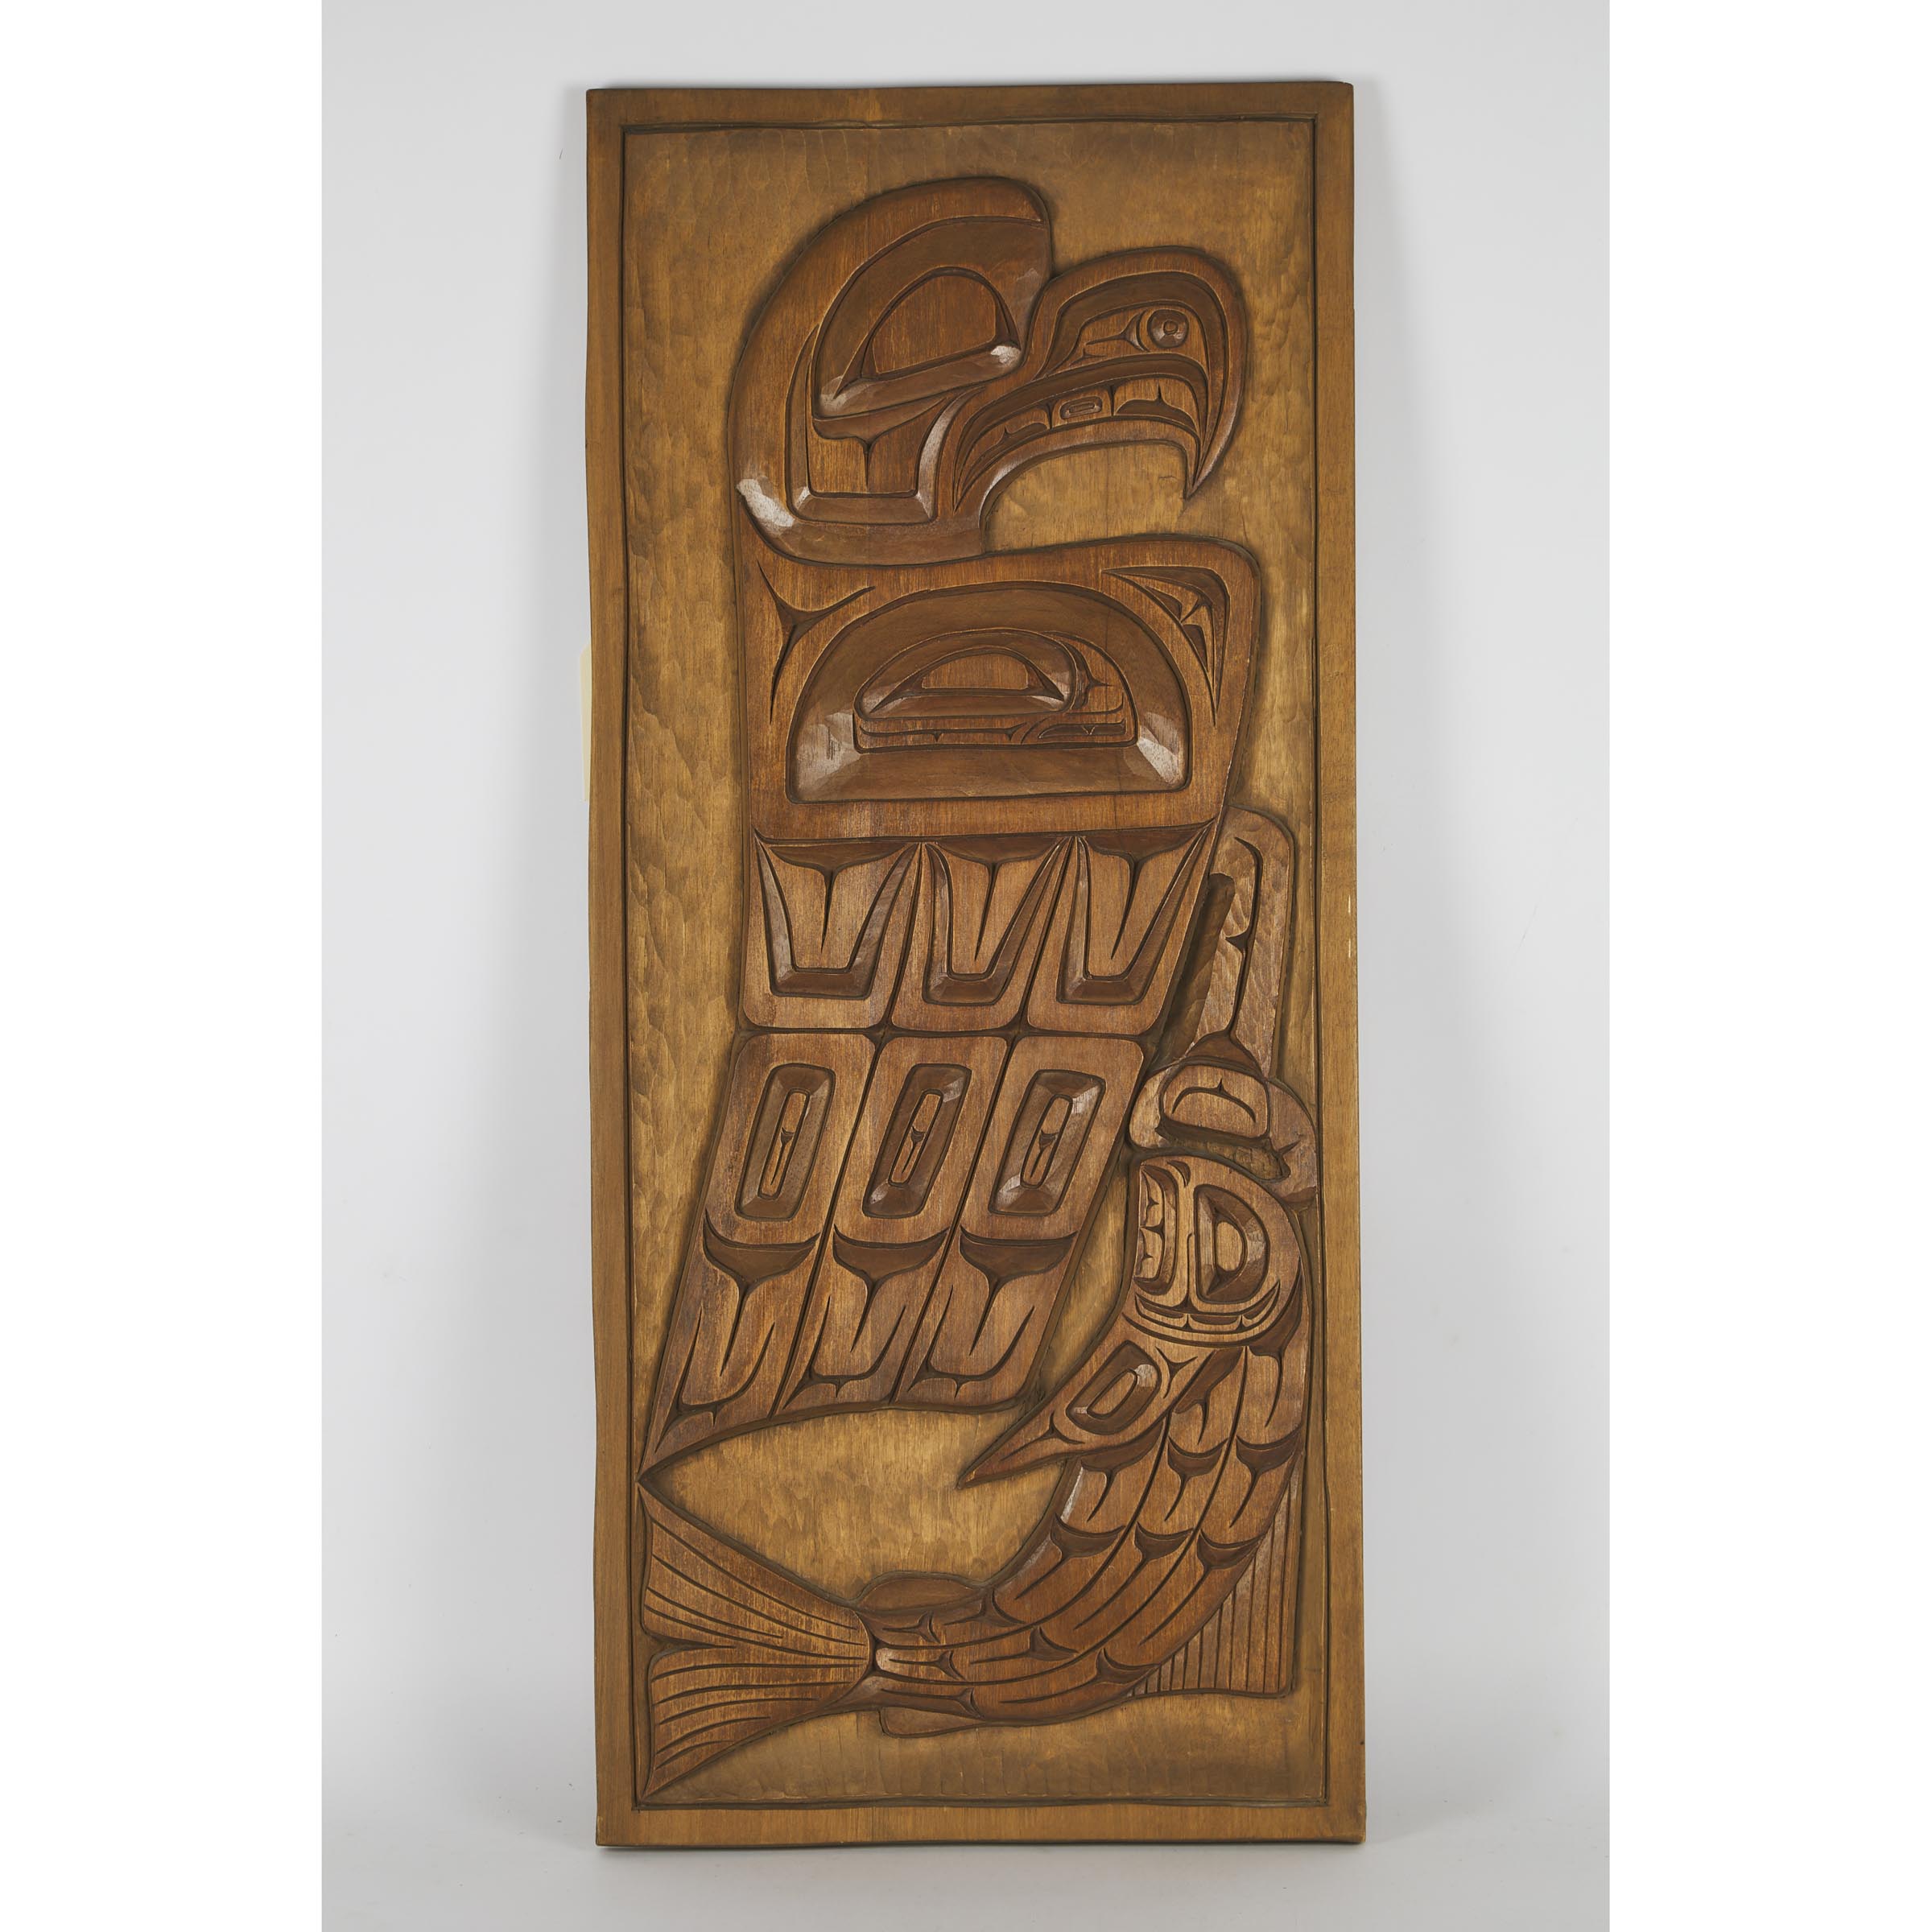 Haida Relief Carved Wood Plaque by R. Thomas, Vancouver, BC, late 20th century